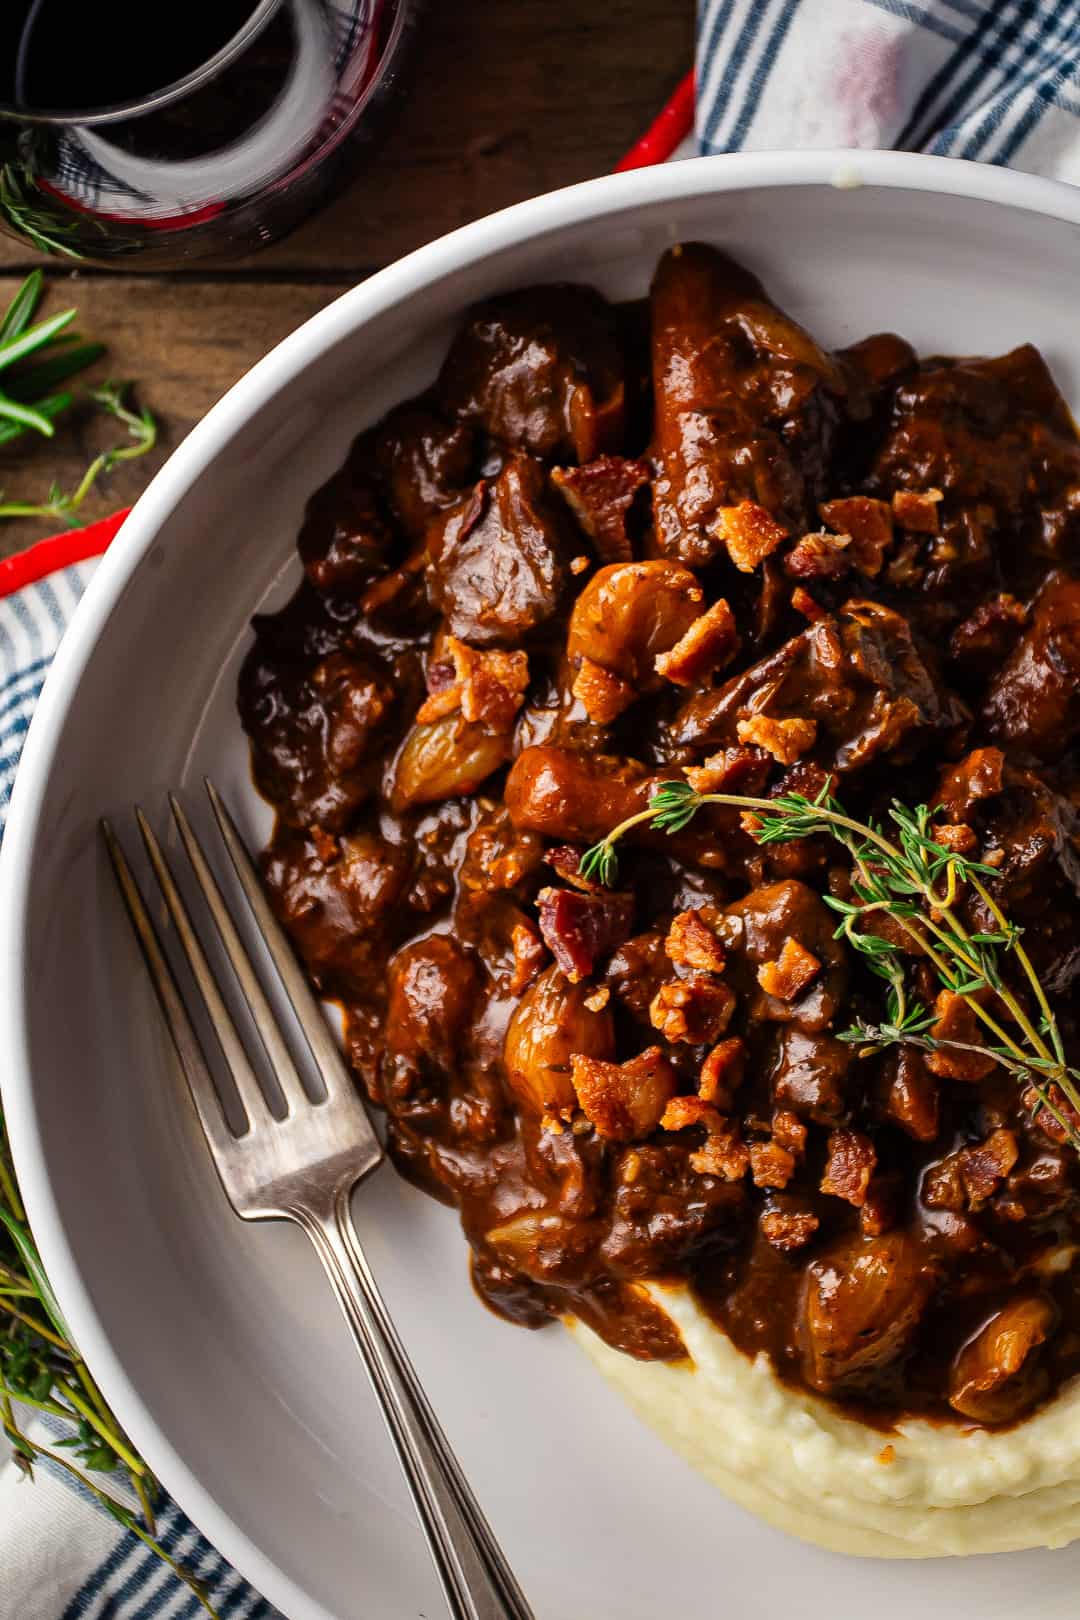 Beef bourguignon recipe, prepared and ladled over mashed potatoes.